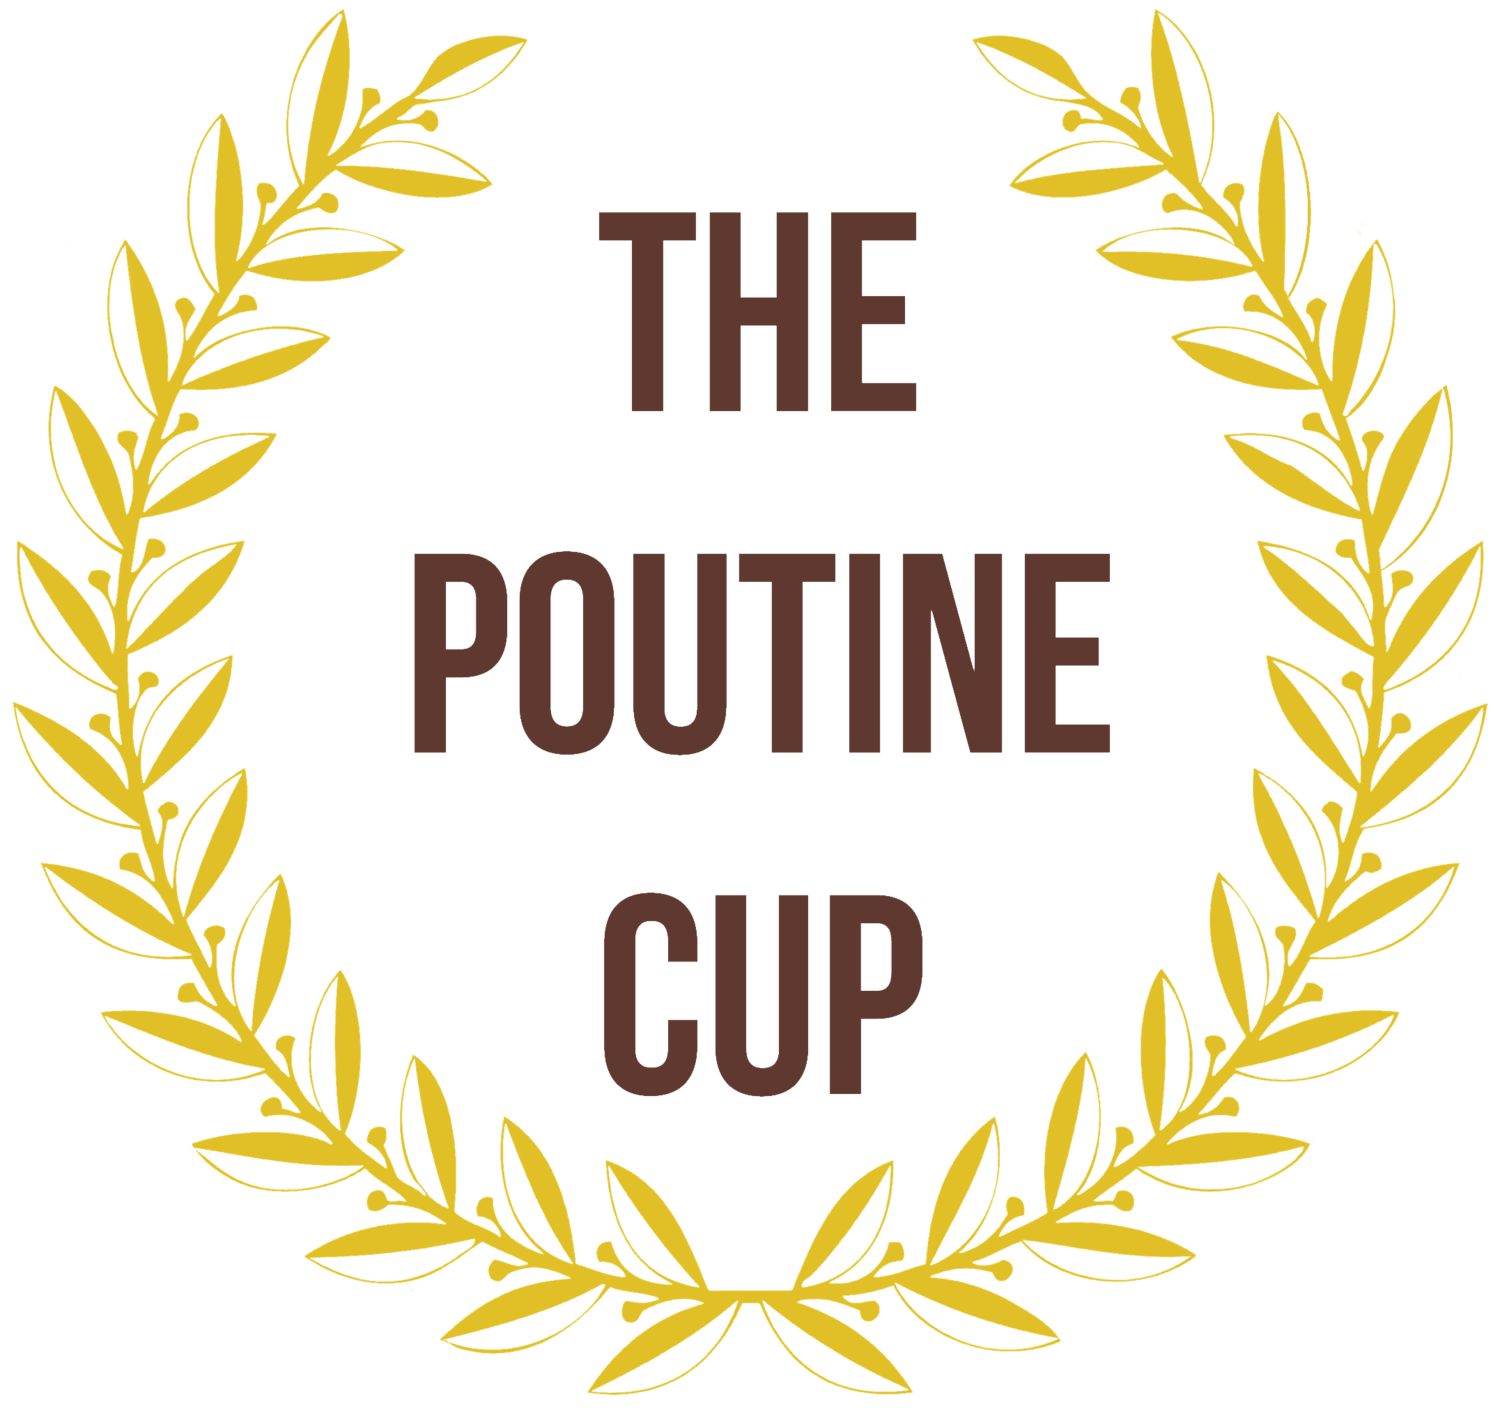 The Poutine Cup